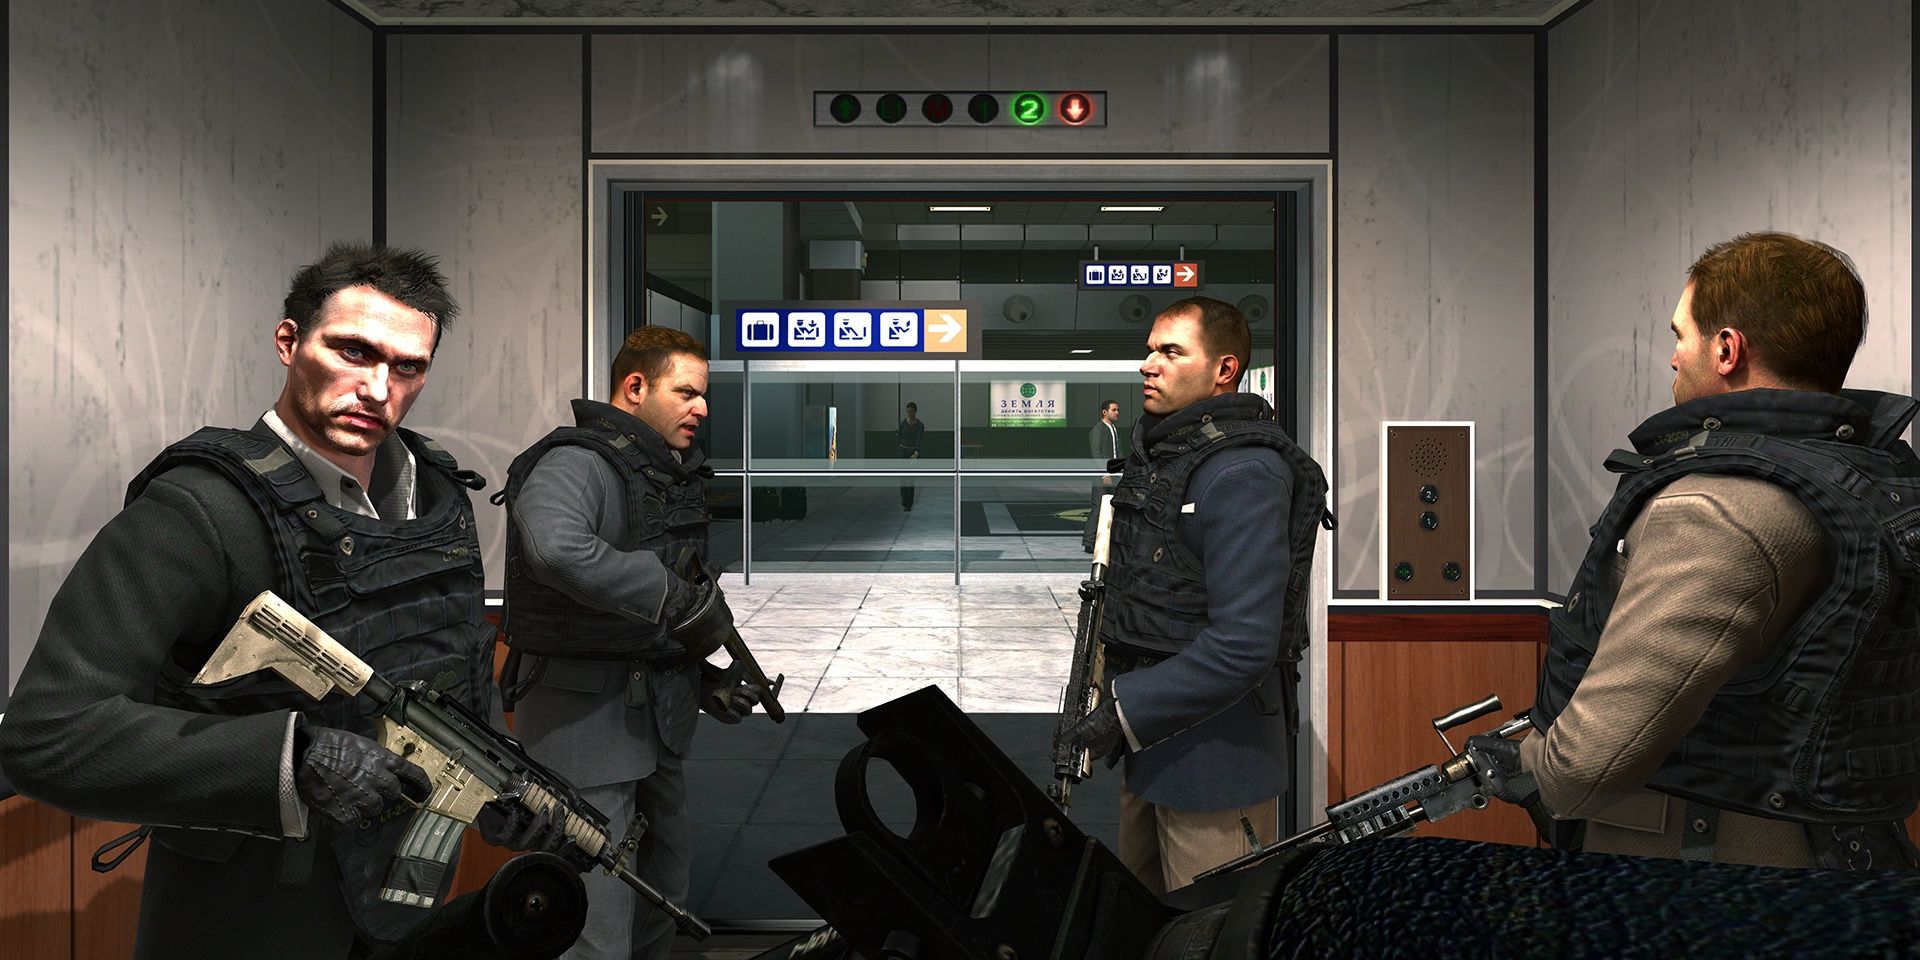 Call Of Duty Modern Warfare 2 Screenshot Of No Russian Mission With Makarov and Crew In Elevator